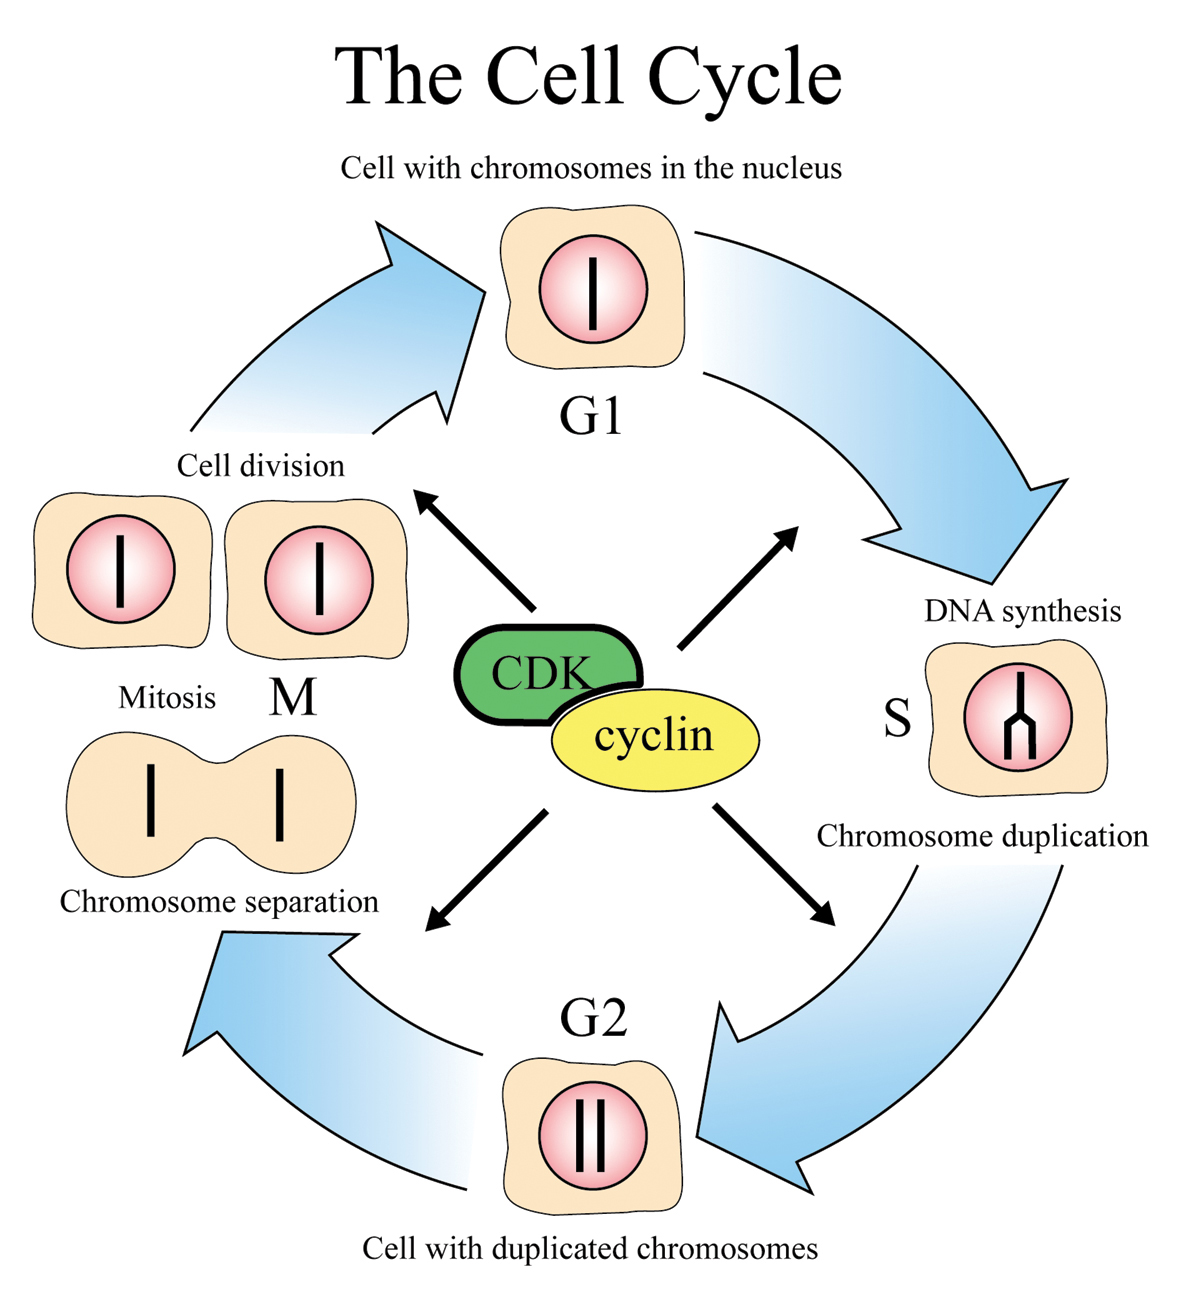 Cells do not divide during G1 phase of the cell cycle.